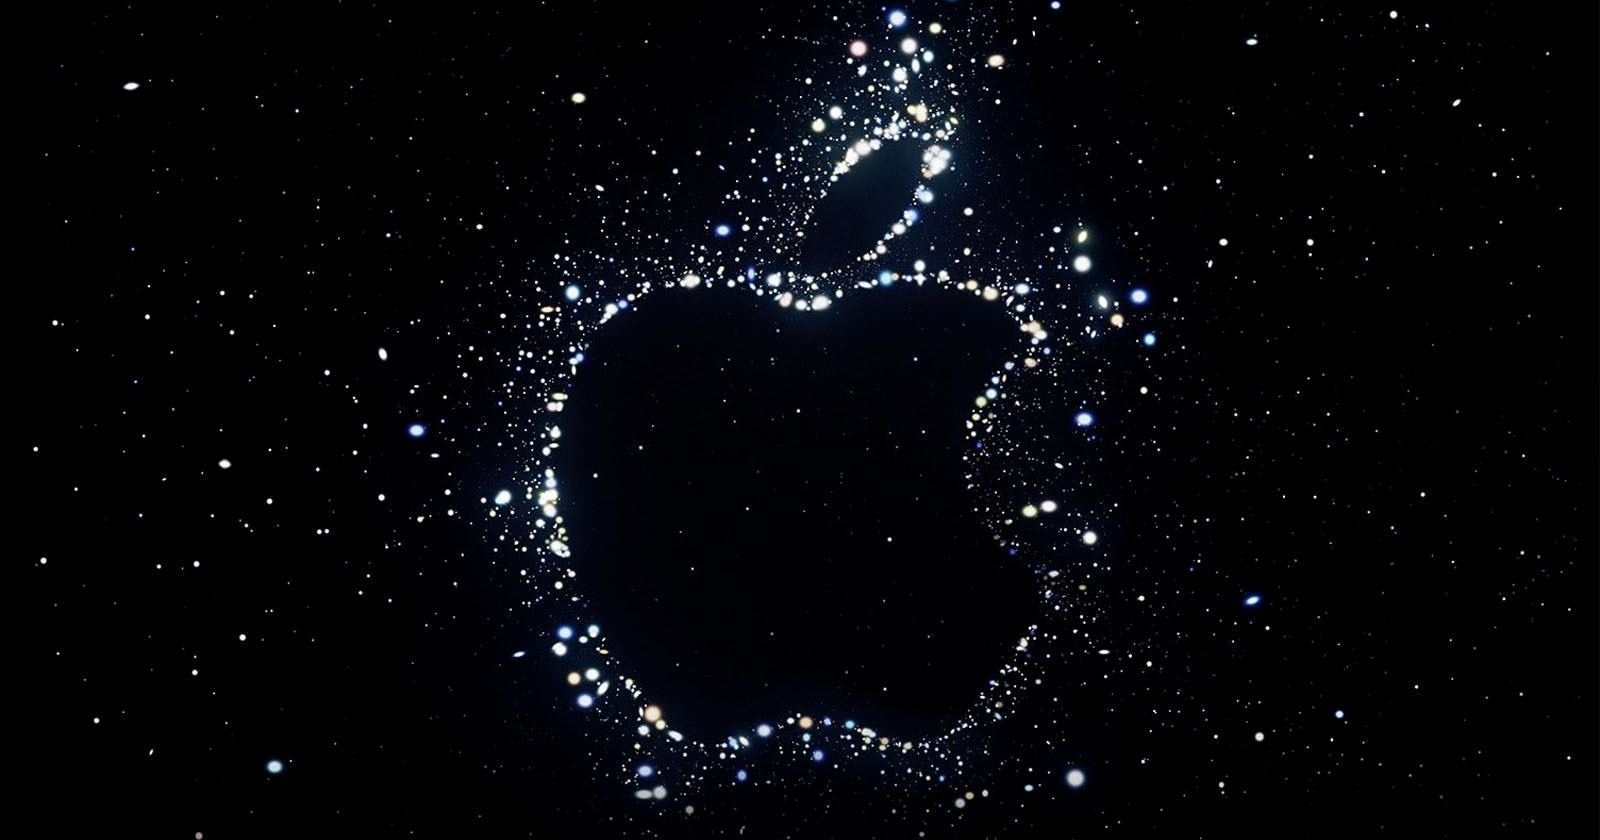  apple hints astrophotography september far out event 